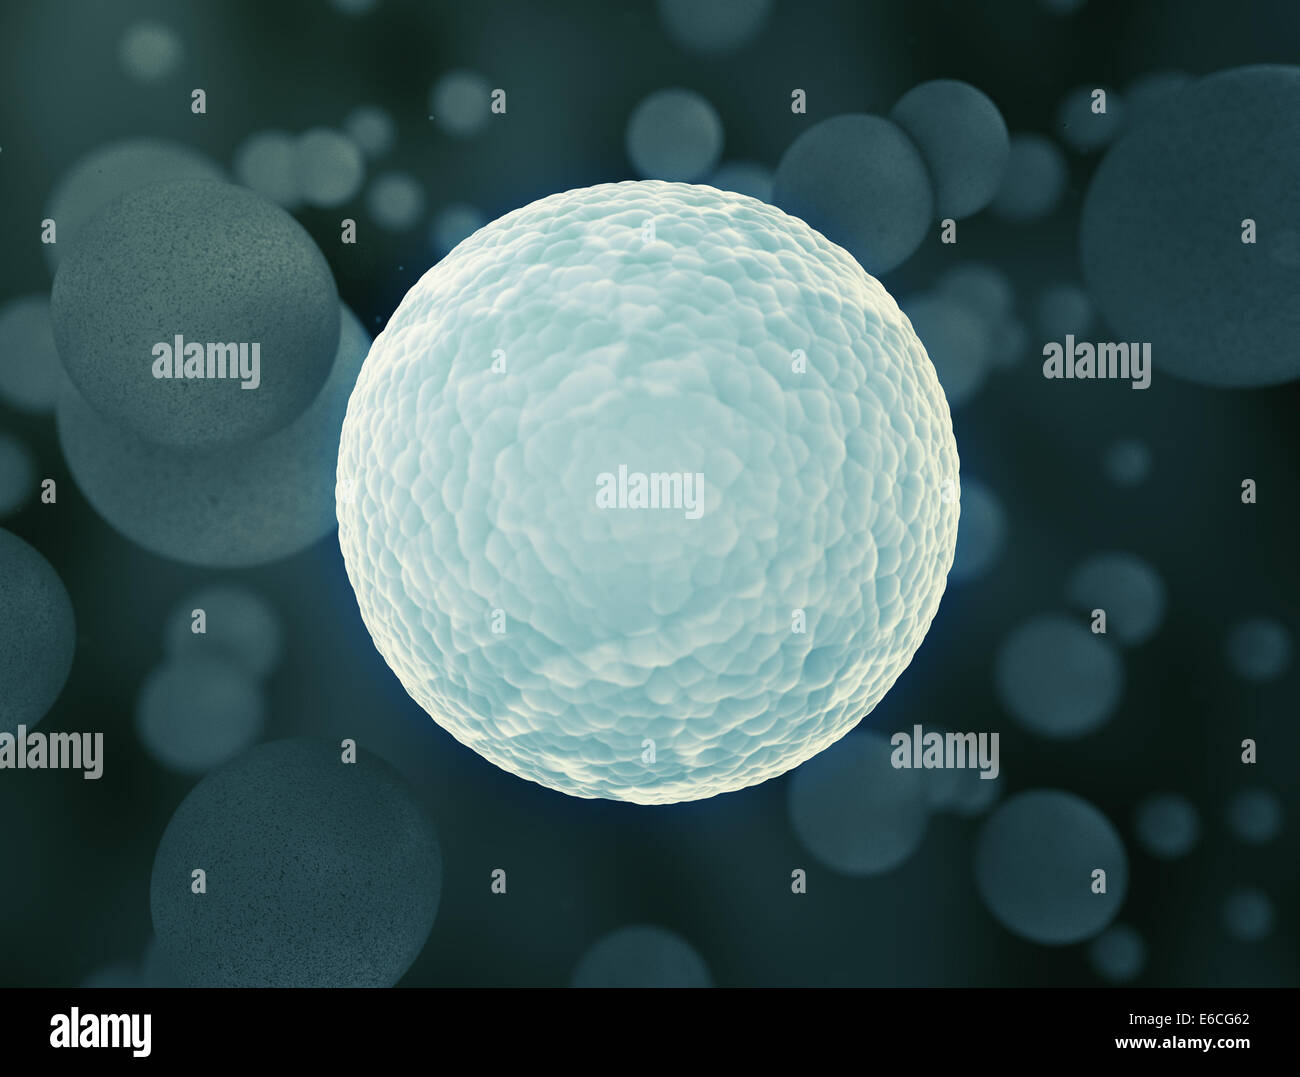 3d rendered illustration of human cells Stock Photo